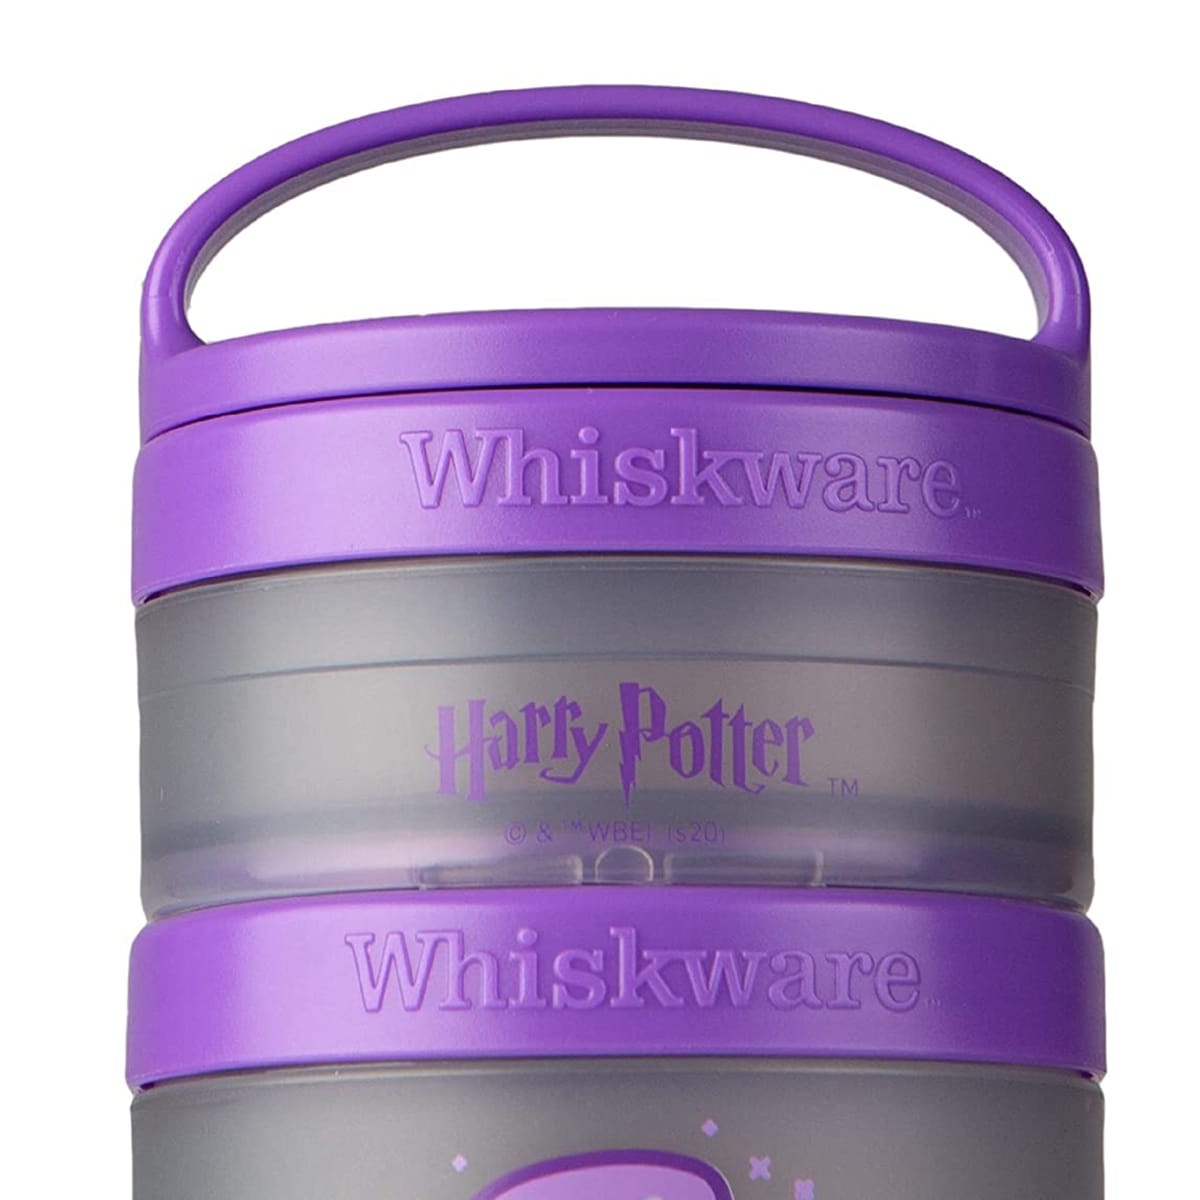 https://ak1.ostkcdn.com/images/products/is/images/direct/341d28f0b5ede79e17257387c04a06f4799dac3e/Whiskware-Harry-Potter-Stackable-Snack-Pack-Containers.jpg